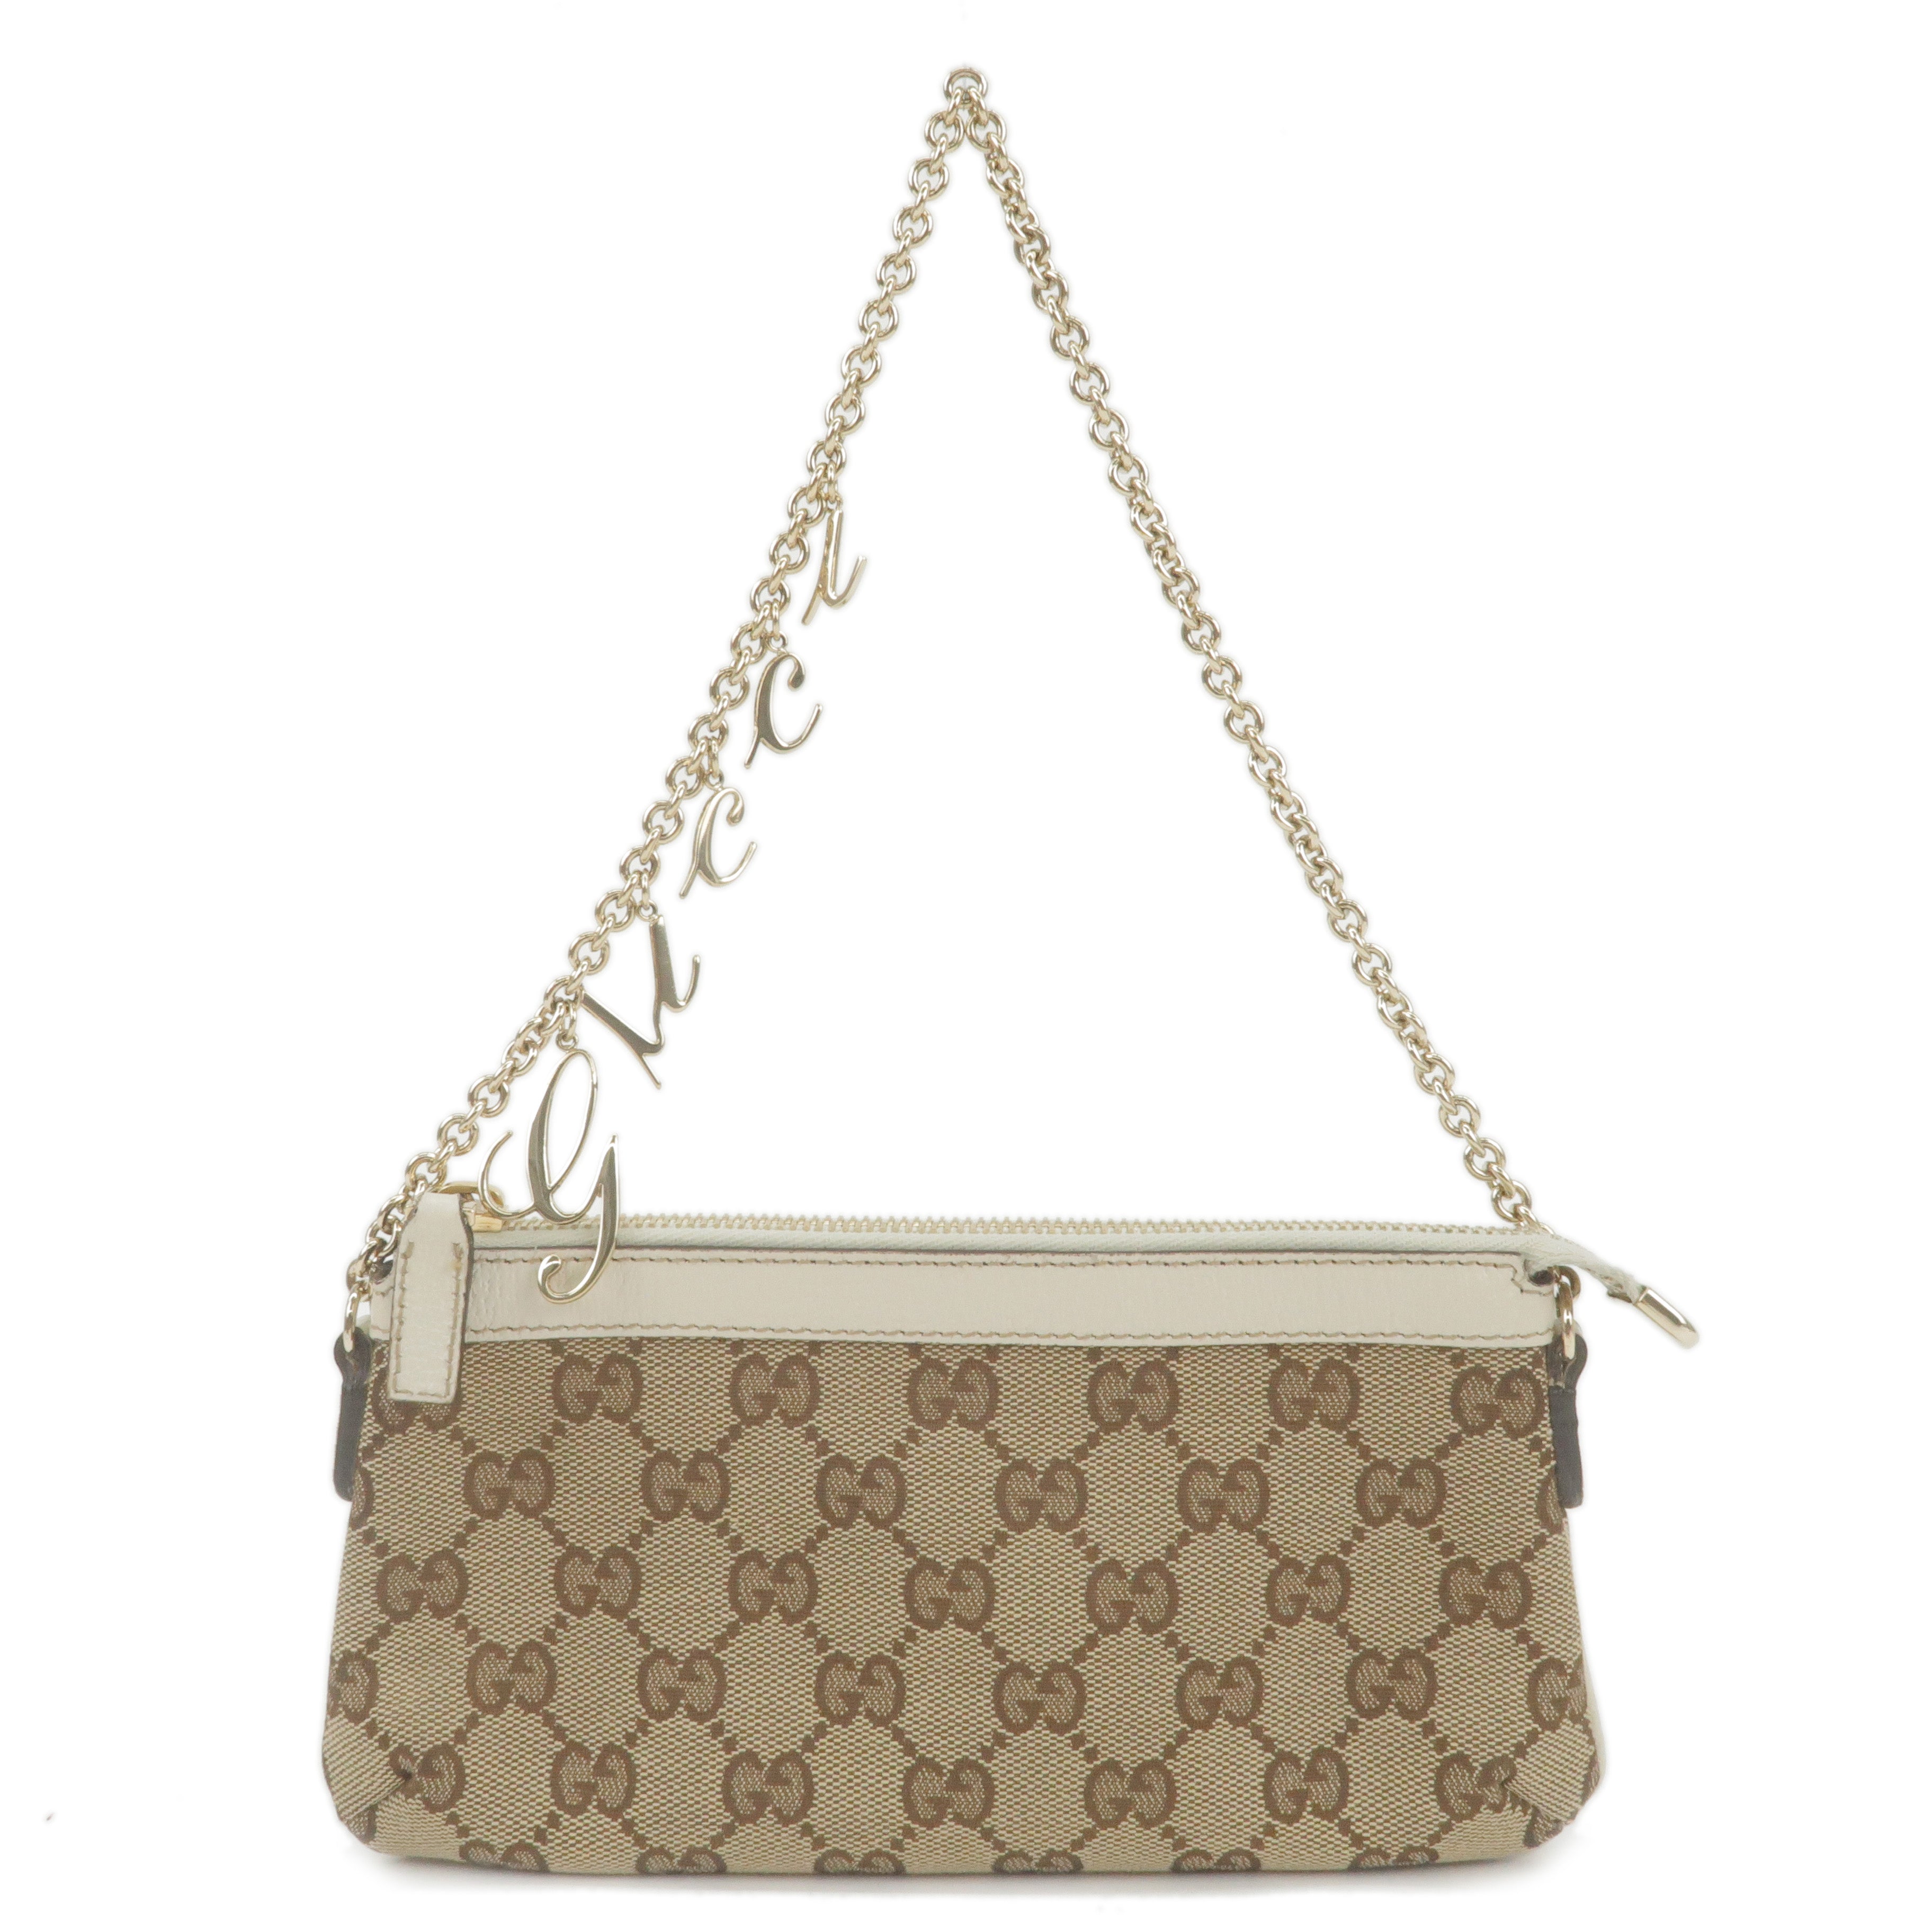 GUCCI-GG-Canvas-Leather-Chain-Pouch-Bag-Beige-Ivory-120940 – dct 